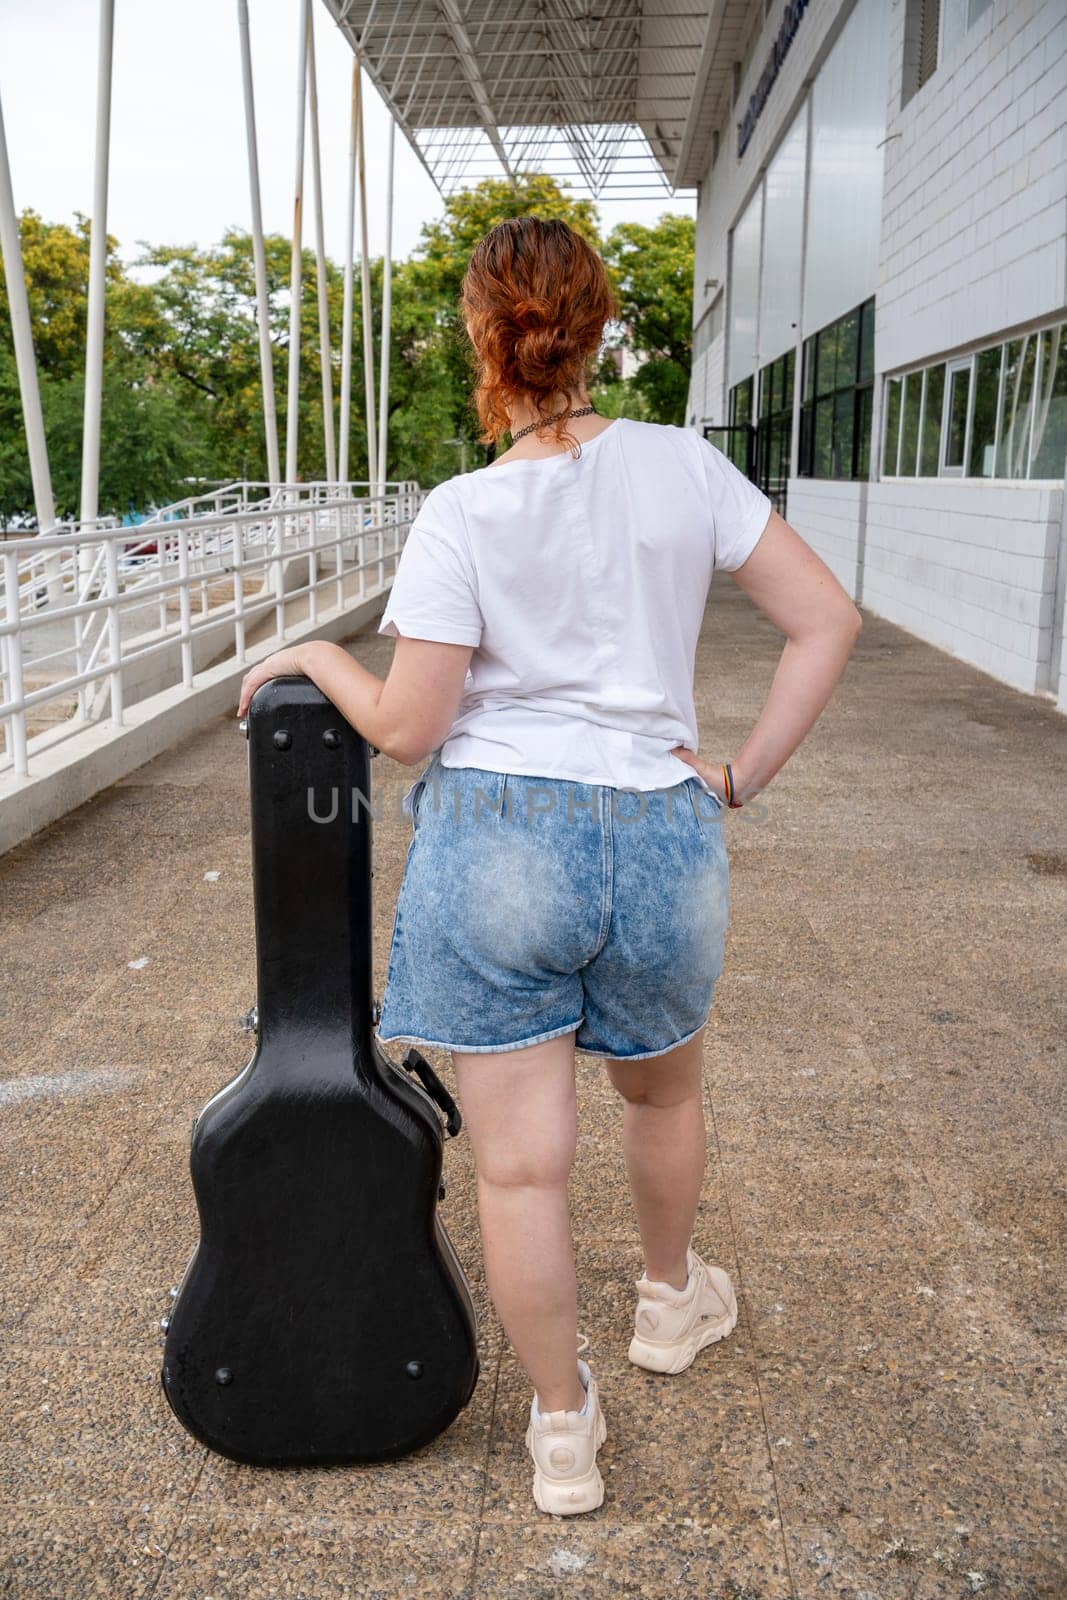 young woman with her back leaning glamorously on a guitar case, street music